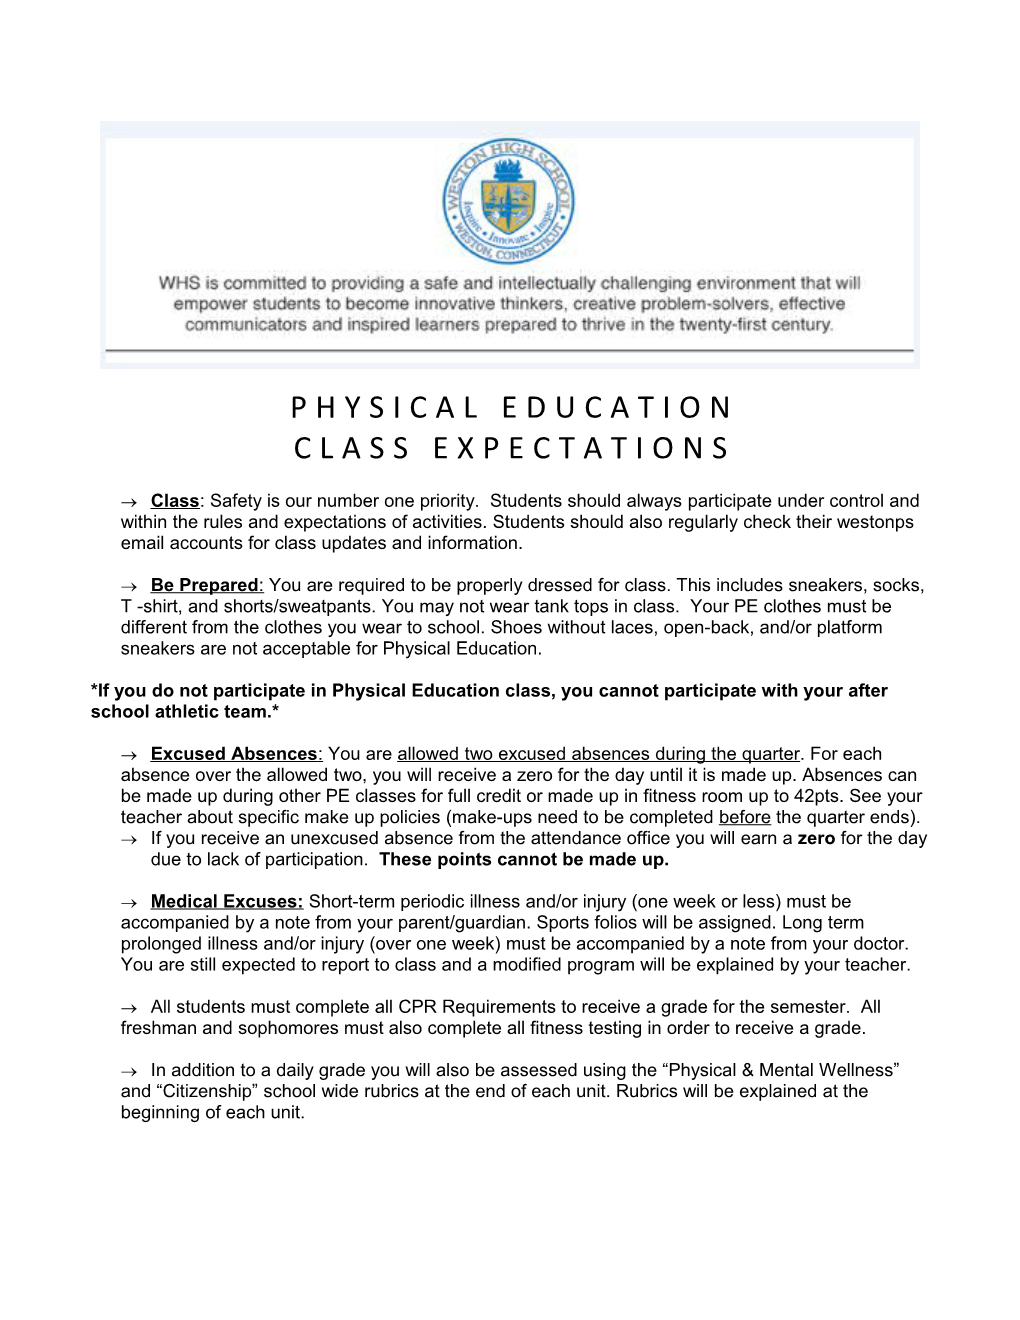 Weston High School Physical Education Class Expectations